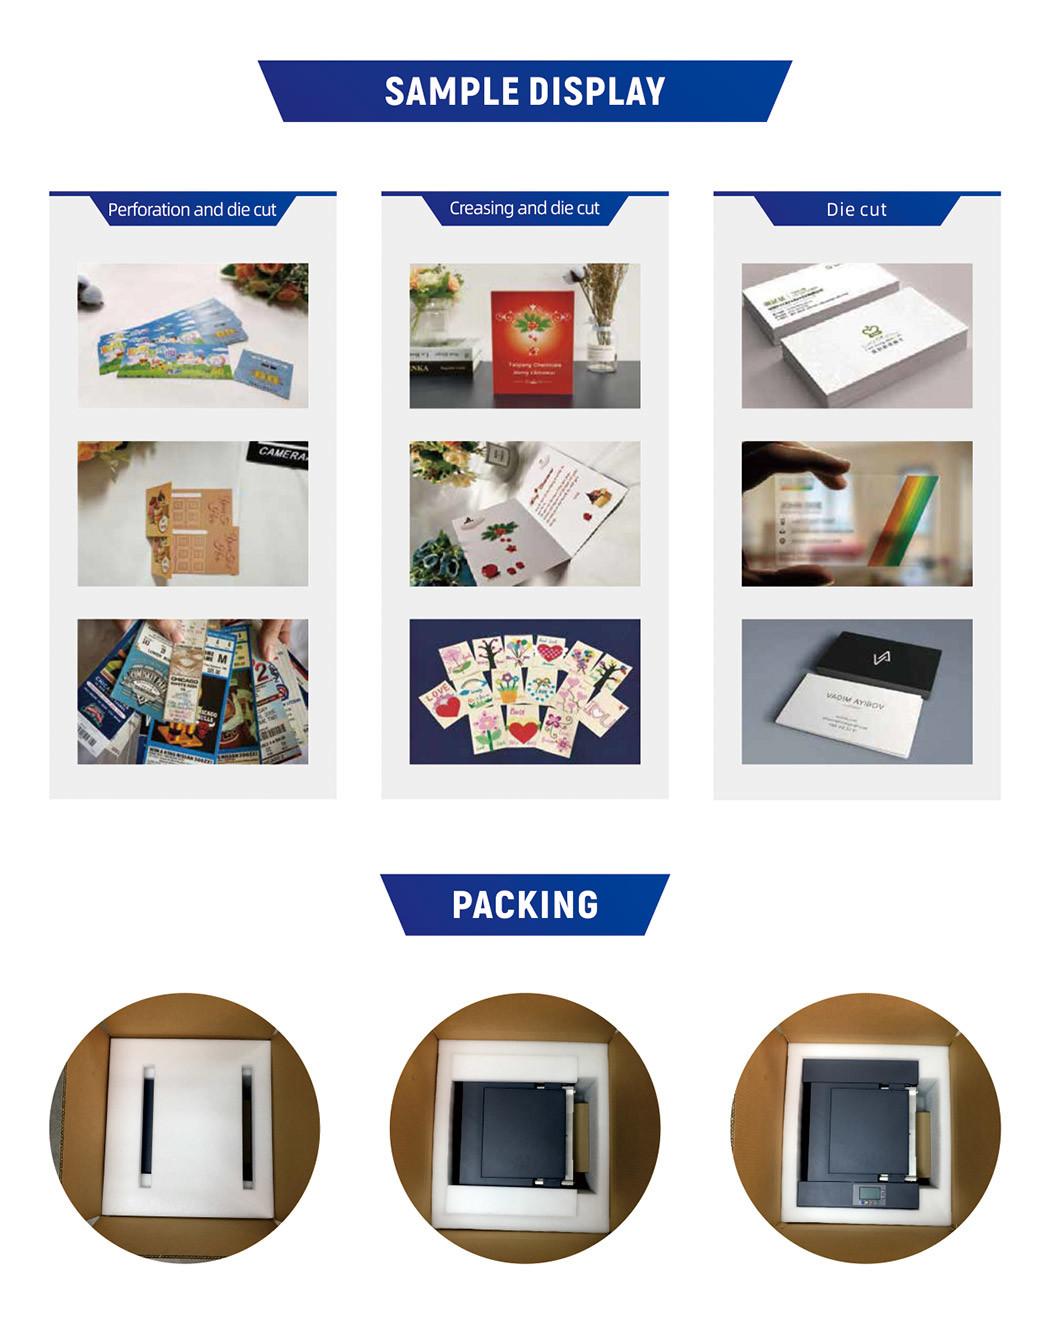 Paper Playing Card PVC Business Card Die Cutting Card Machine Cc-330/Trading Card Die Cutter